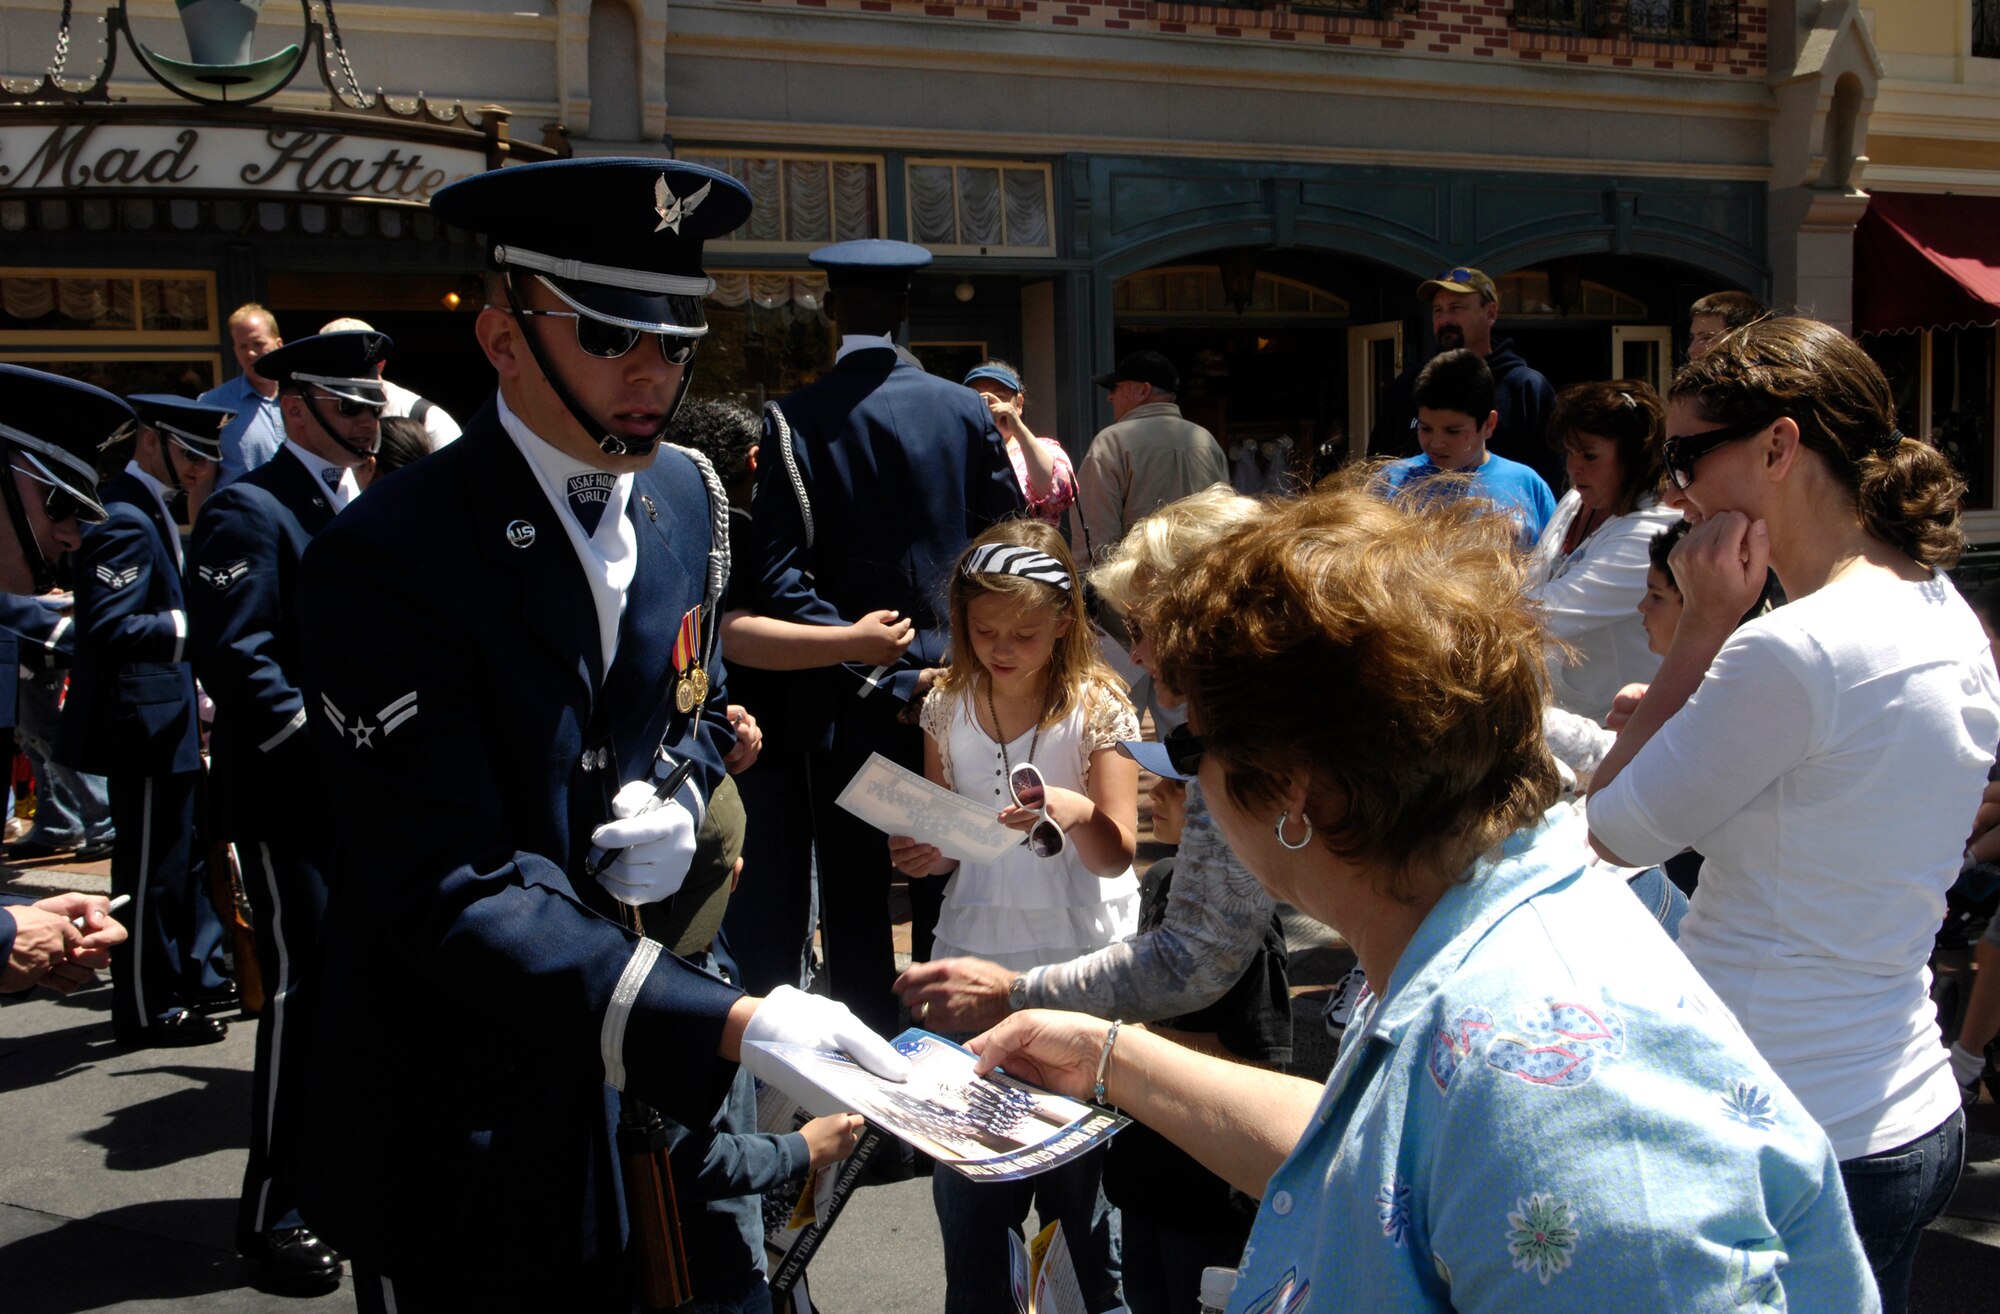 Airman 1st Class Mike McCabe, Air Force Honor Guard Drill Team member, signs autographs and talks about the Air Force with an audience member after performing in a 16 Man drill routine at Disneyland Resort in Aneheim, Calif., 18 April 2007. The Drill Team is the traveling component of the Air Force Honor Guard and tours Air Force bases world wide showcasing the precision of today's Air Force to recruit, retain, and inspire Airmen for the Air Force mission. (U.S. Air Force photo by Senior Airman Daniel R. DeCook)(Released)